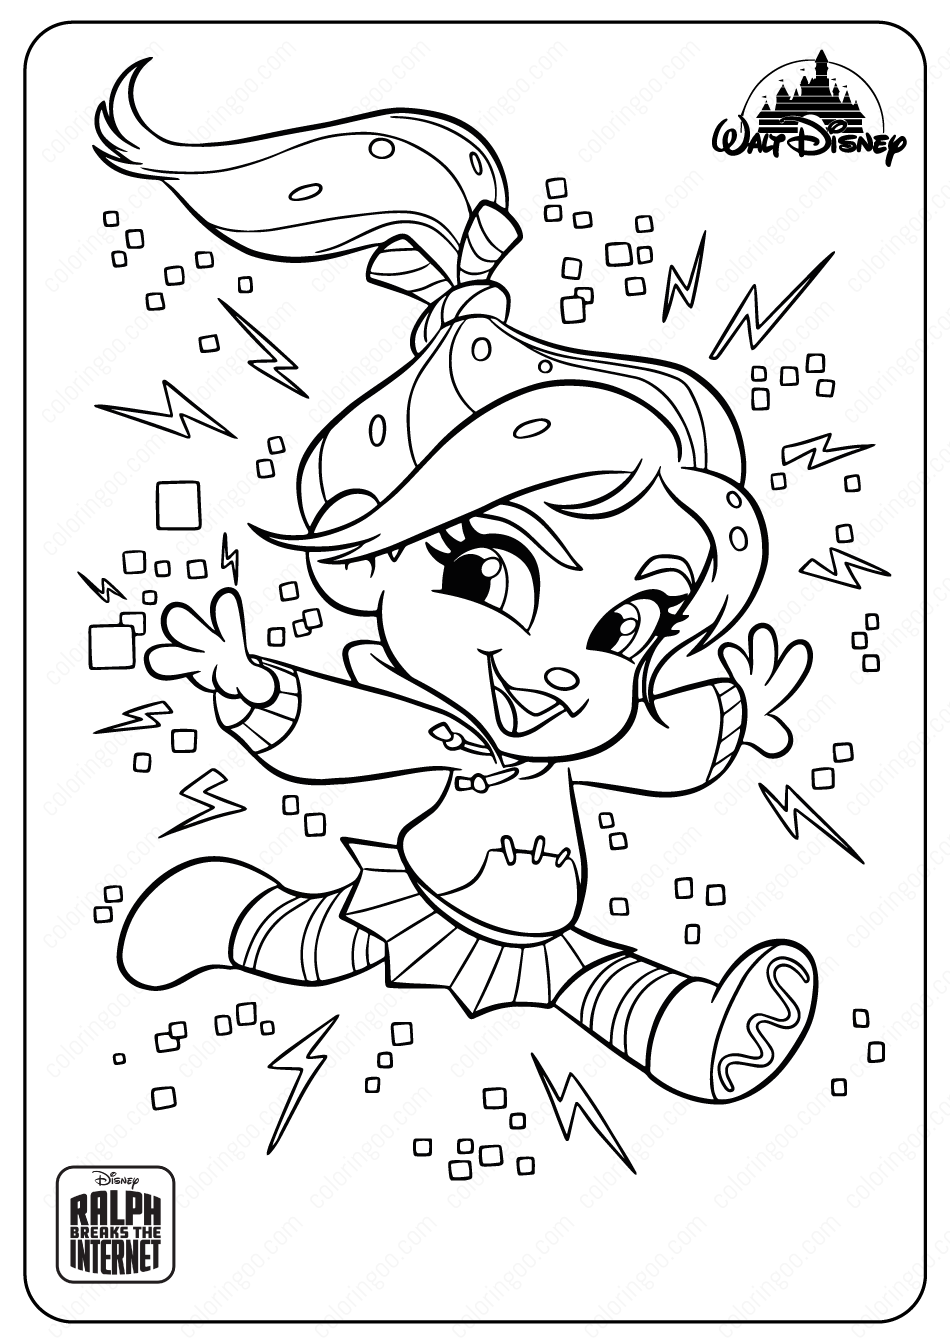 disney ralph breaks the internet vanellope coloring pages